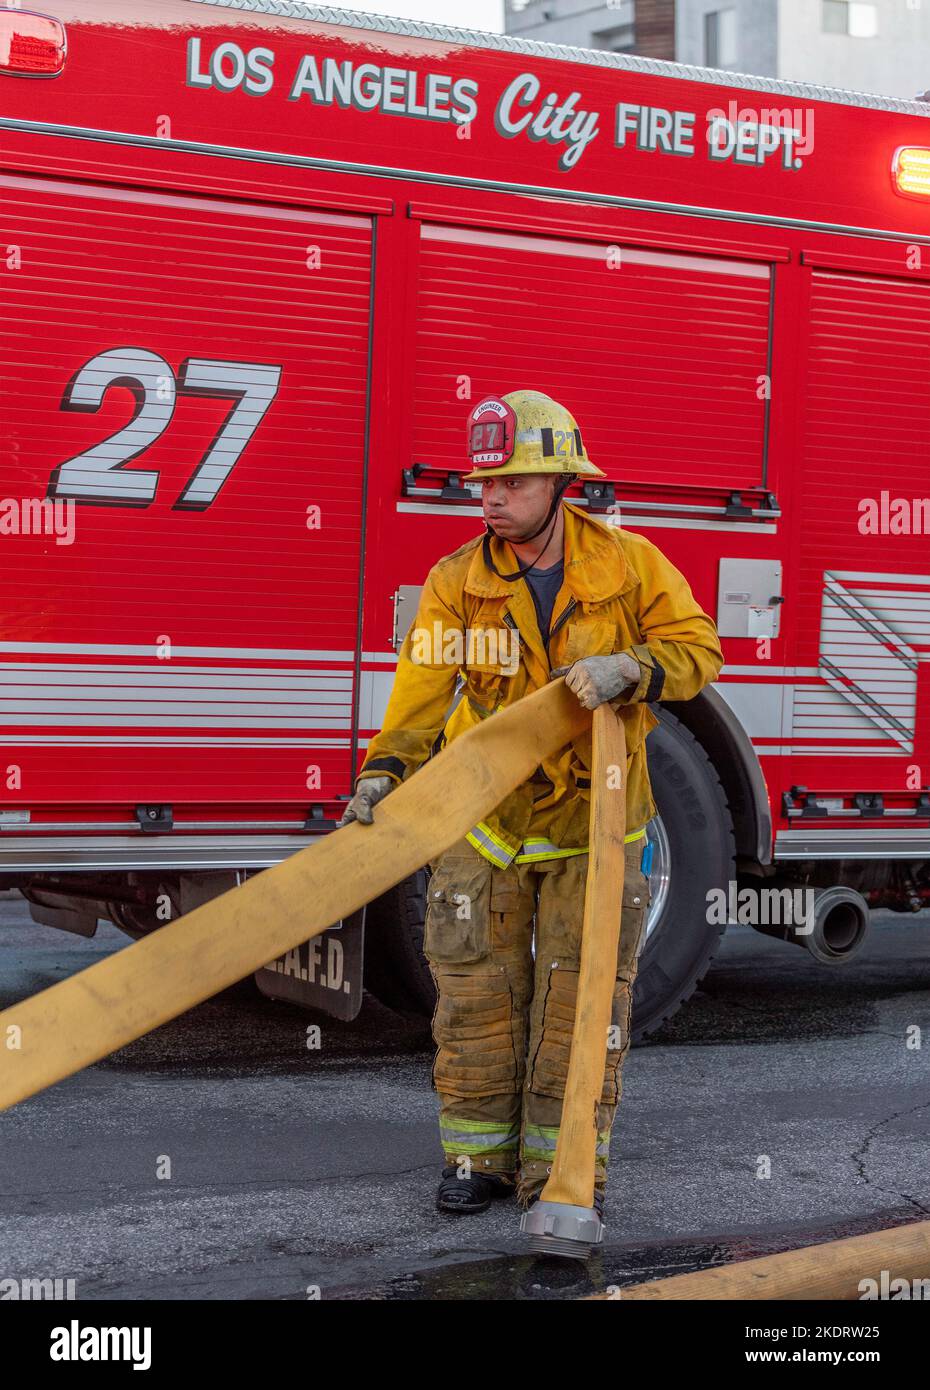 Los Angeles, CA, USA – November 3, 2022: Los Angeles Fire Department firefighters put out a house fire on Martel street in Los Angeles, CA. Stock Photo